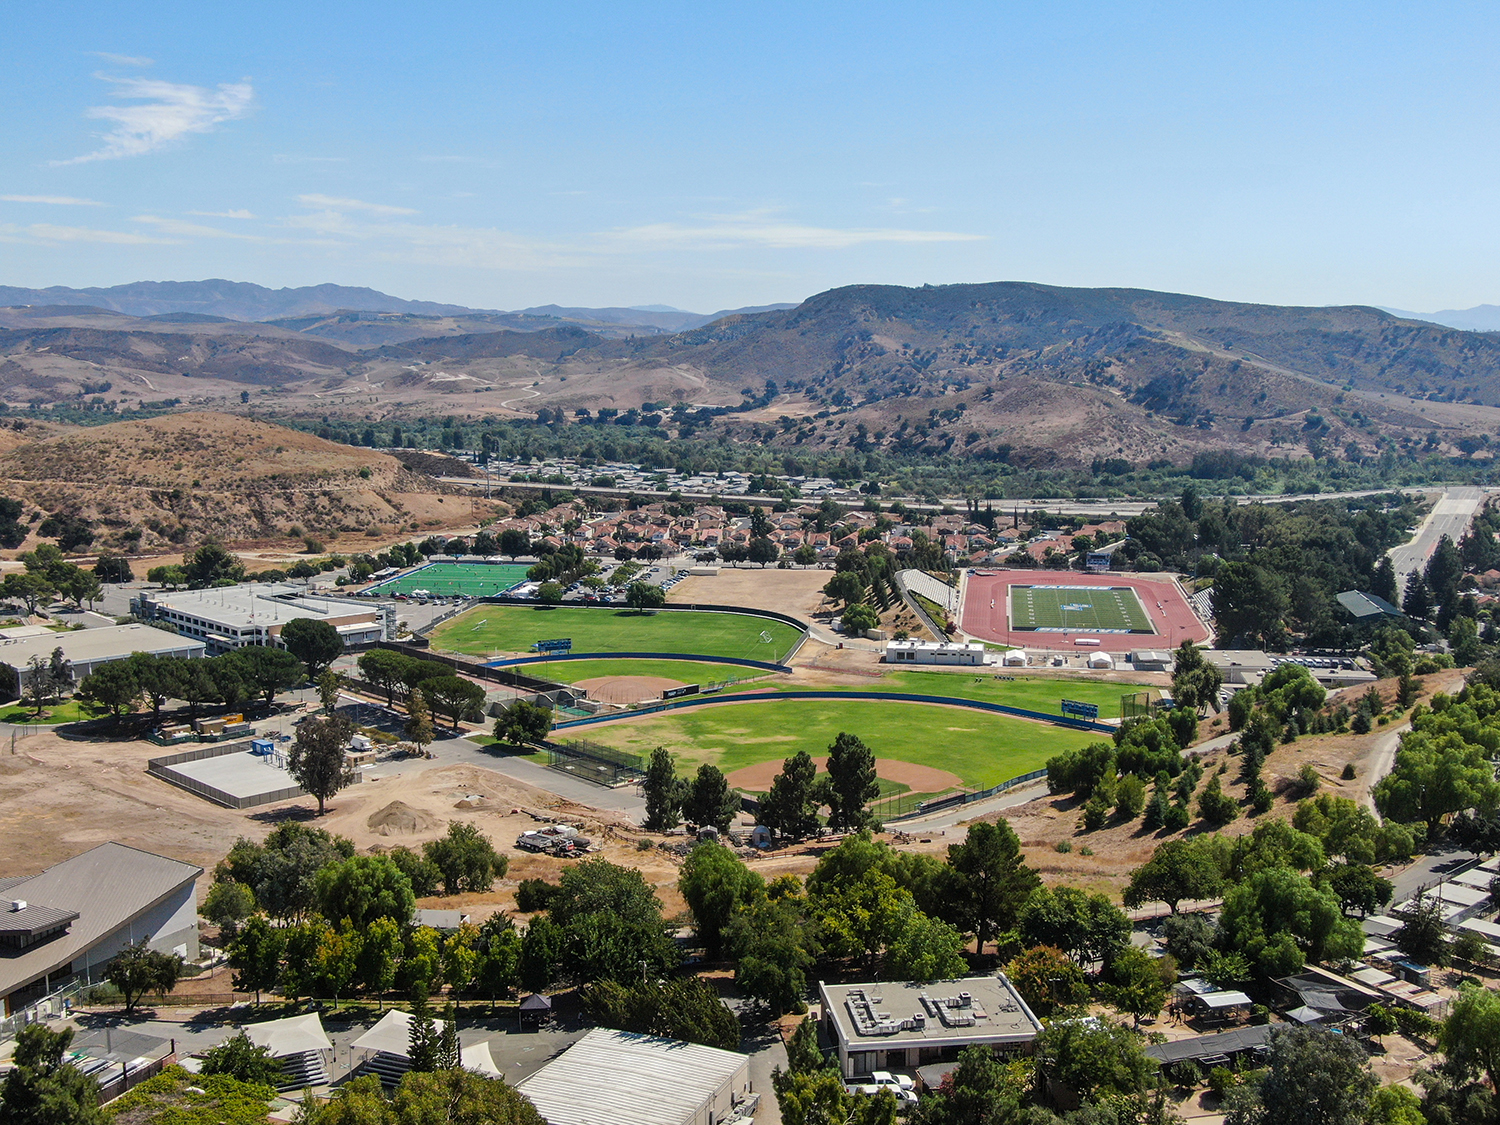 An aerial view of a soccer field and mountains.